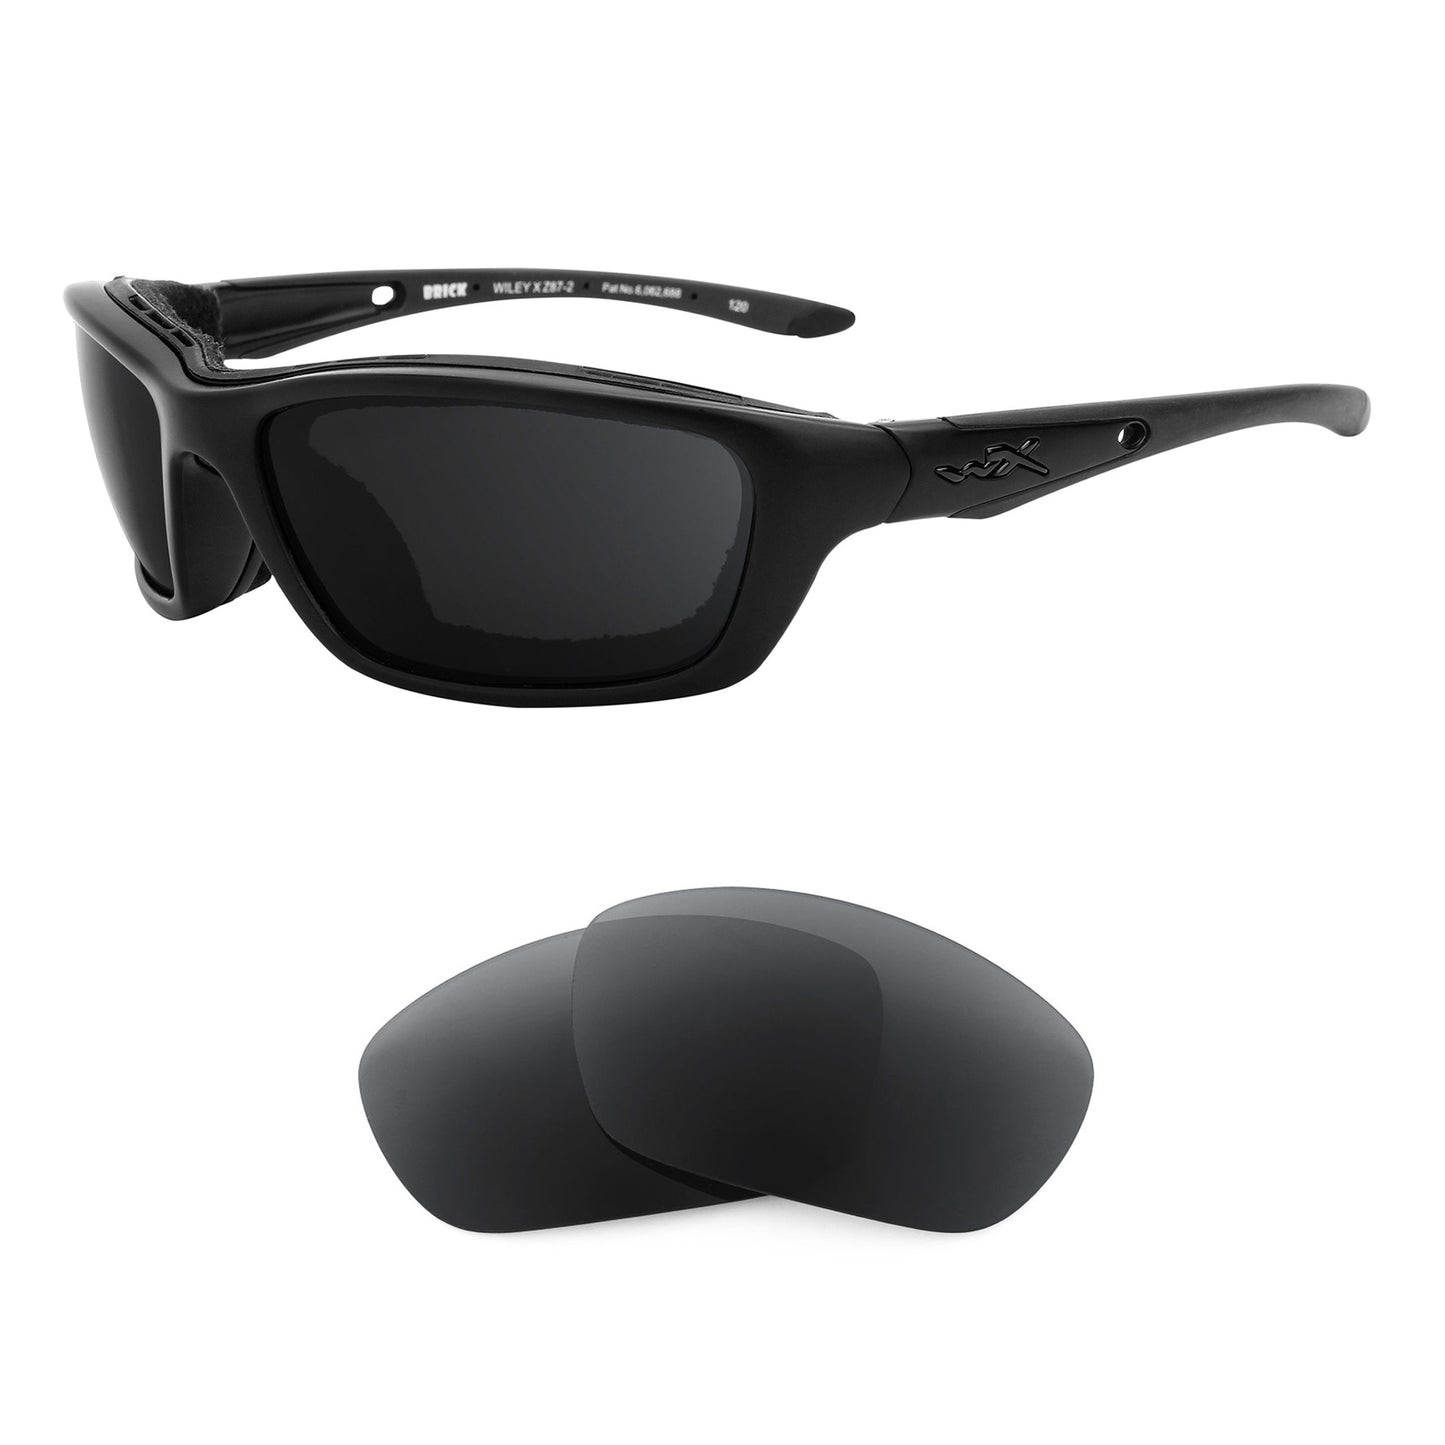 Wiley X Brick sunglasses with replacement lenses